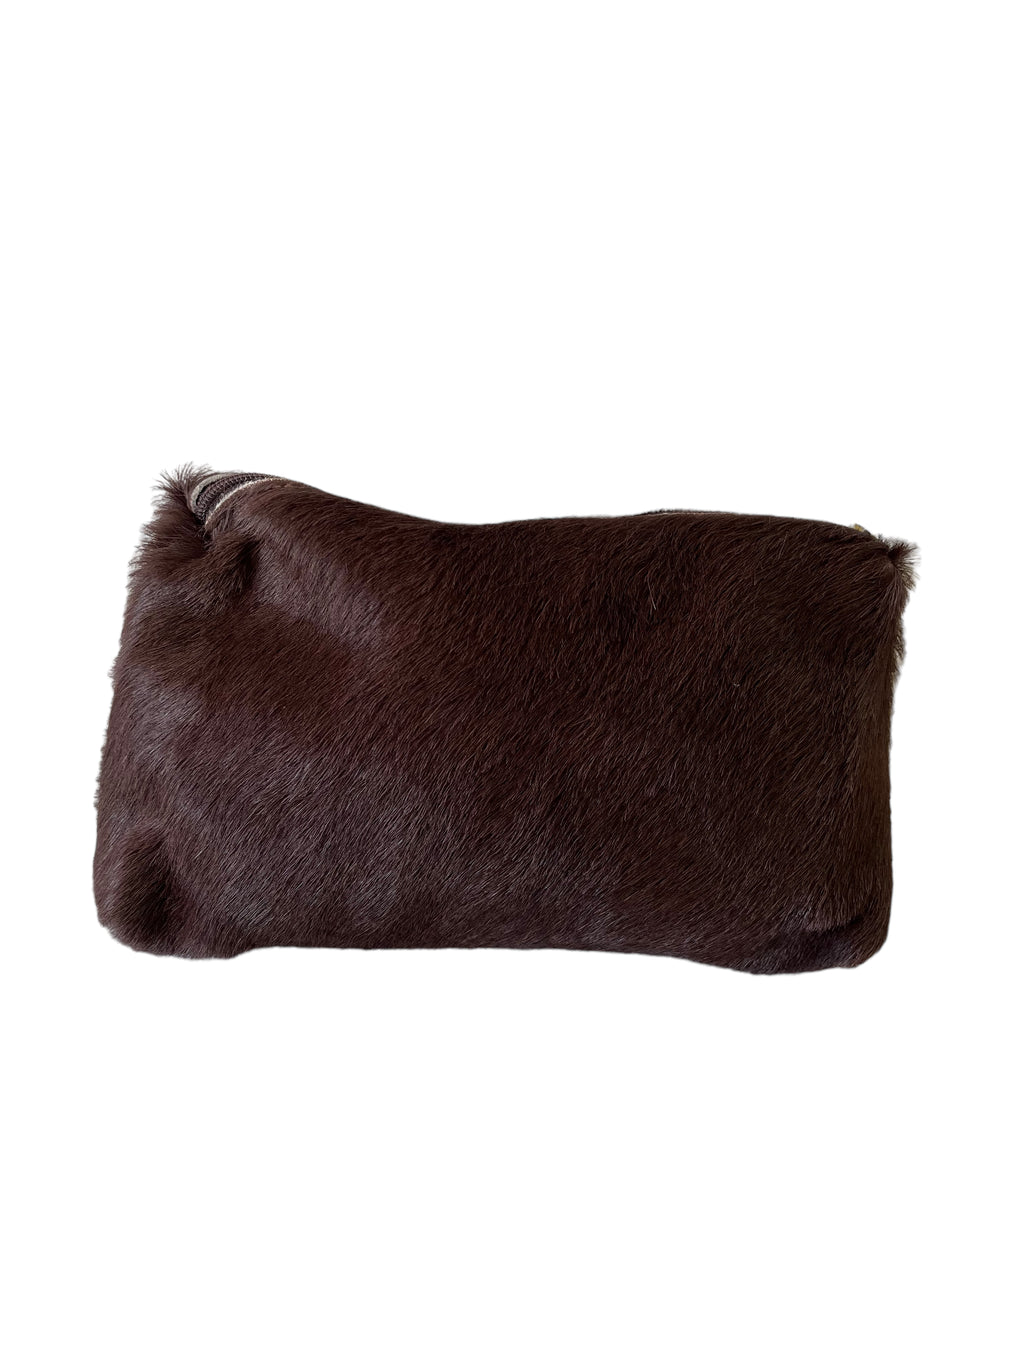 The Kempton Cosmetic Pouch -Brown Hair On Hide